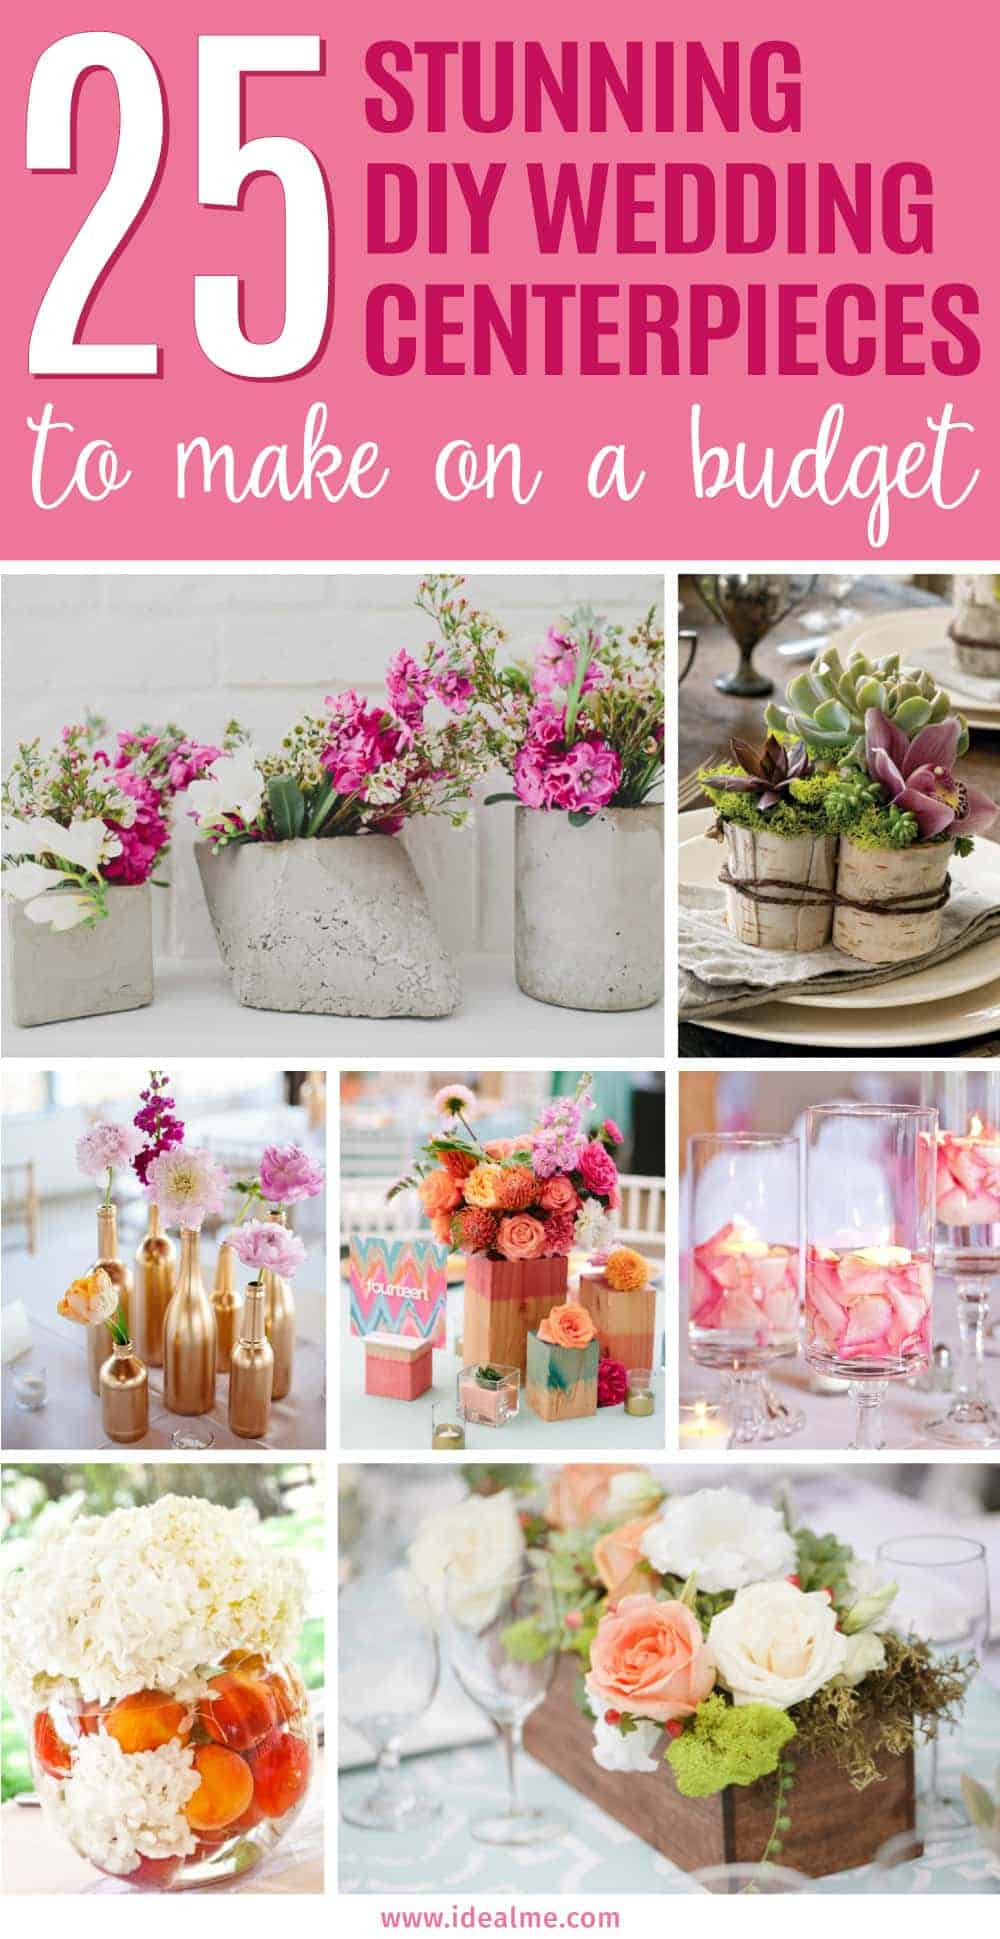 DIY Wedding Favors On A Budget
 25 Stunning DIY Wedding Centerpieces to Make on a Bud